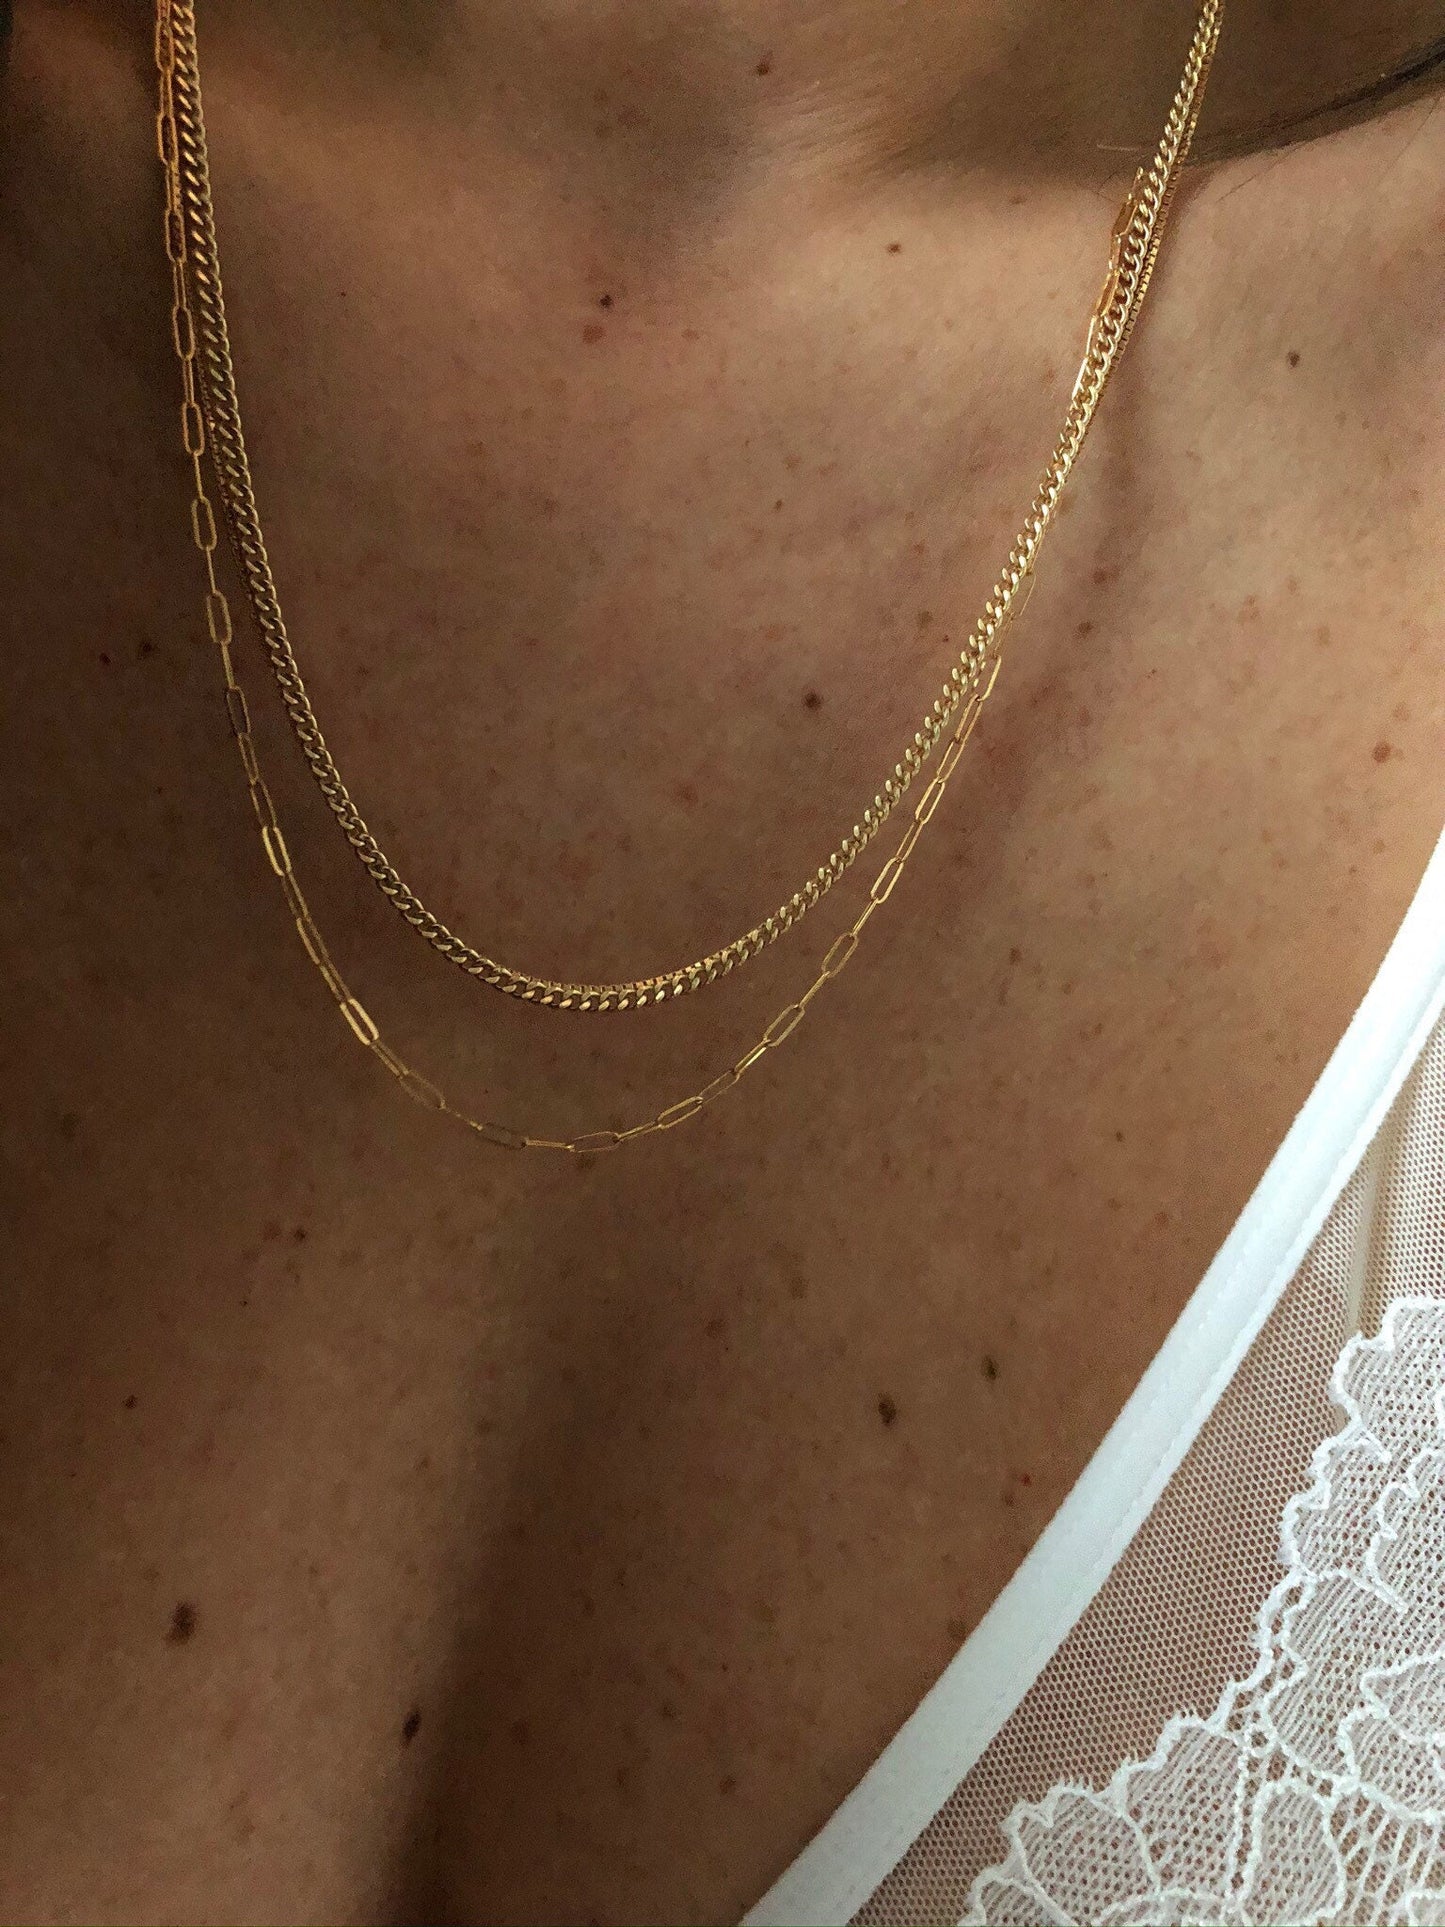 LEA Gold Dainty Necklace